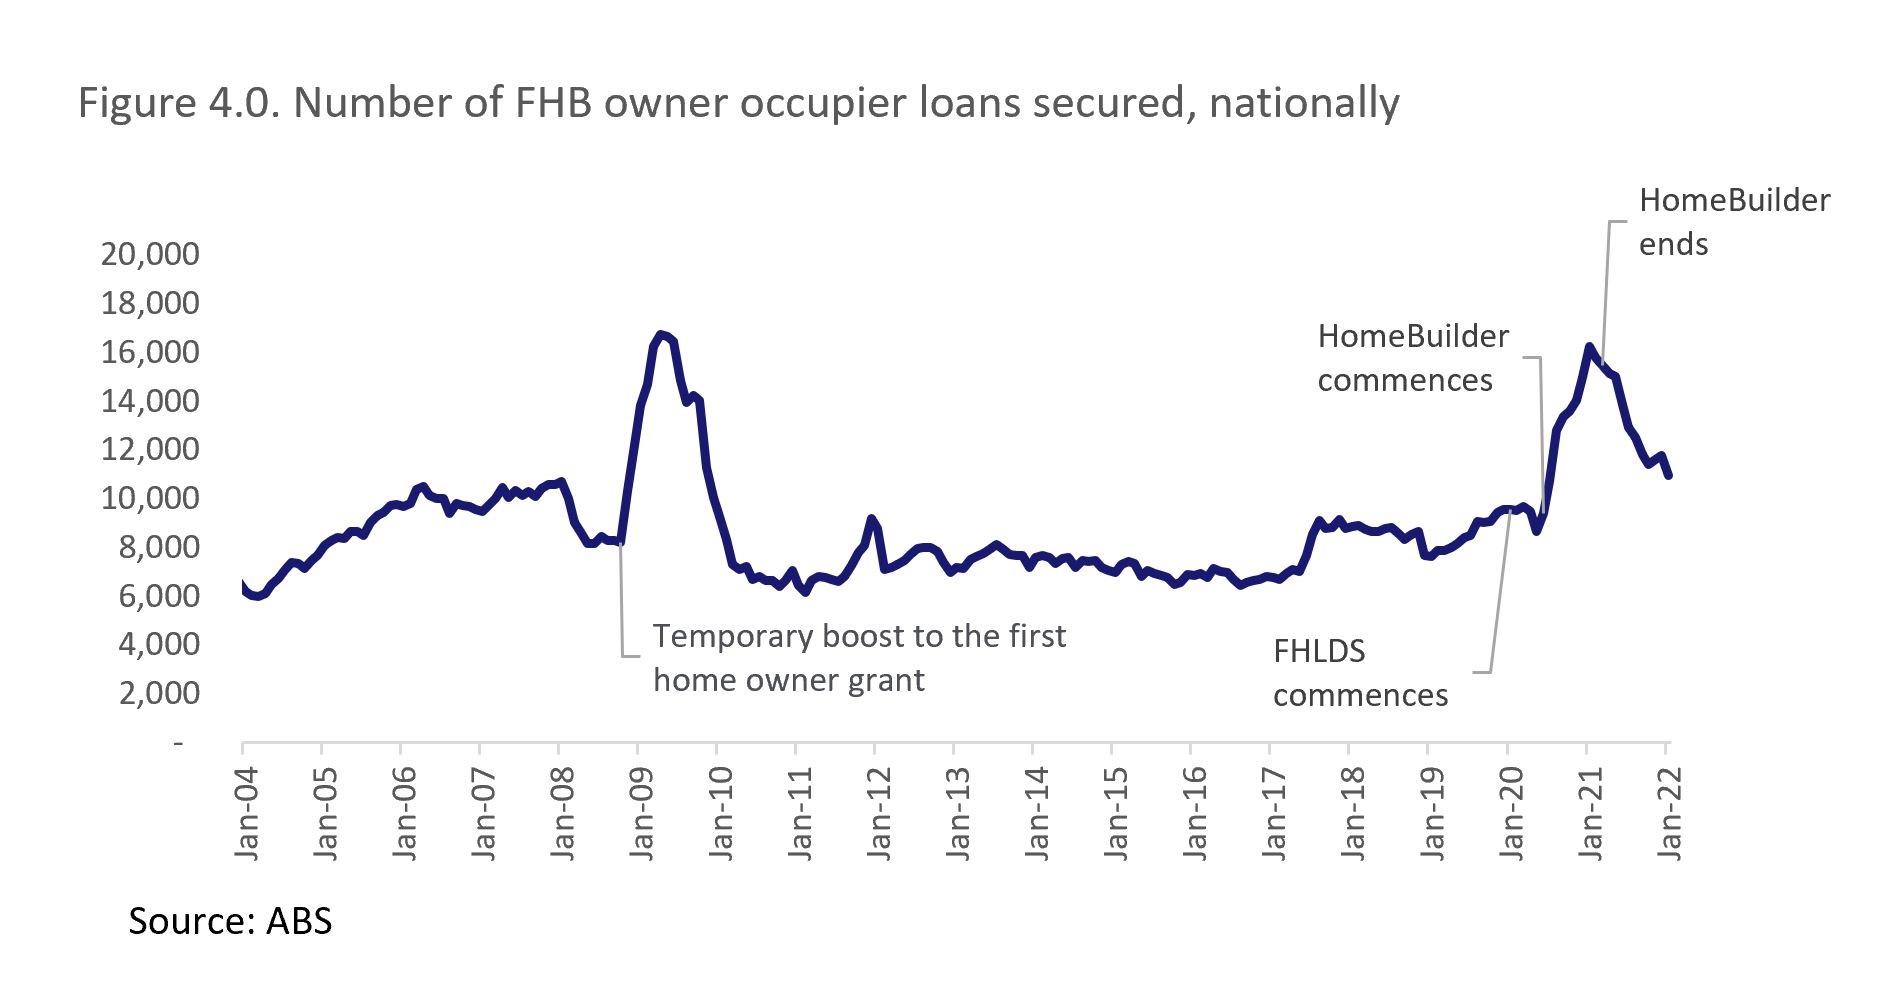 Number of FHB owner occupier loans secured nationally